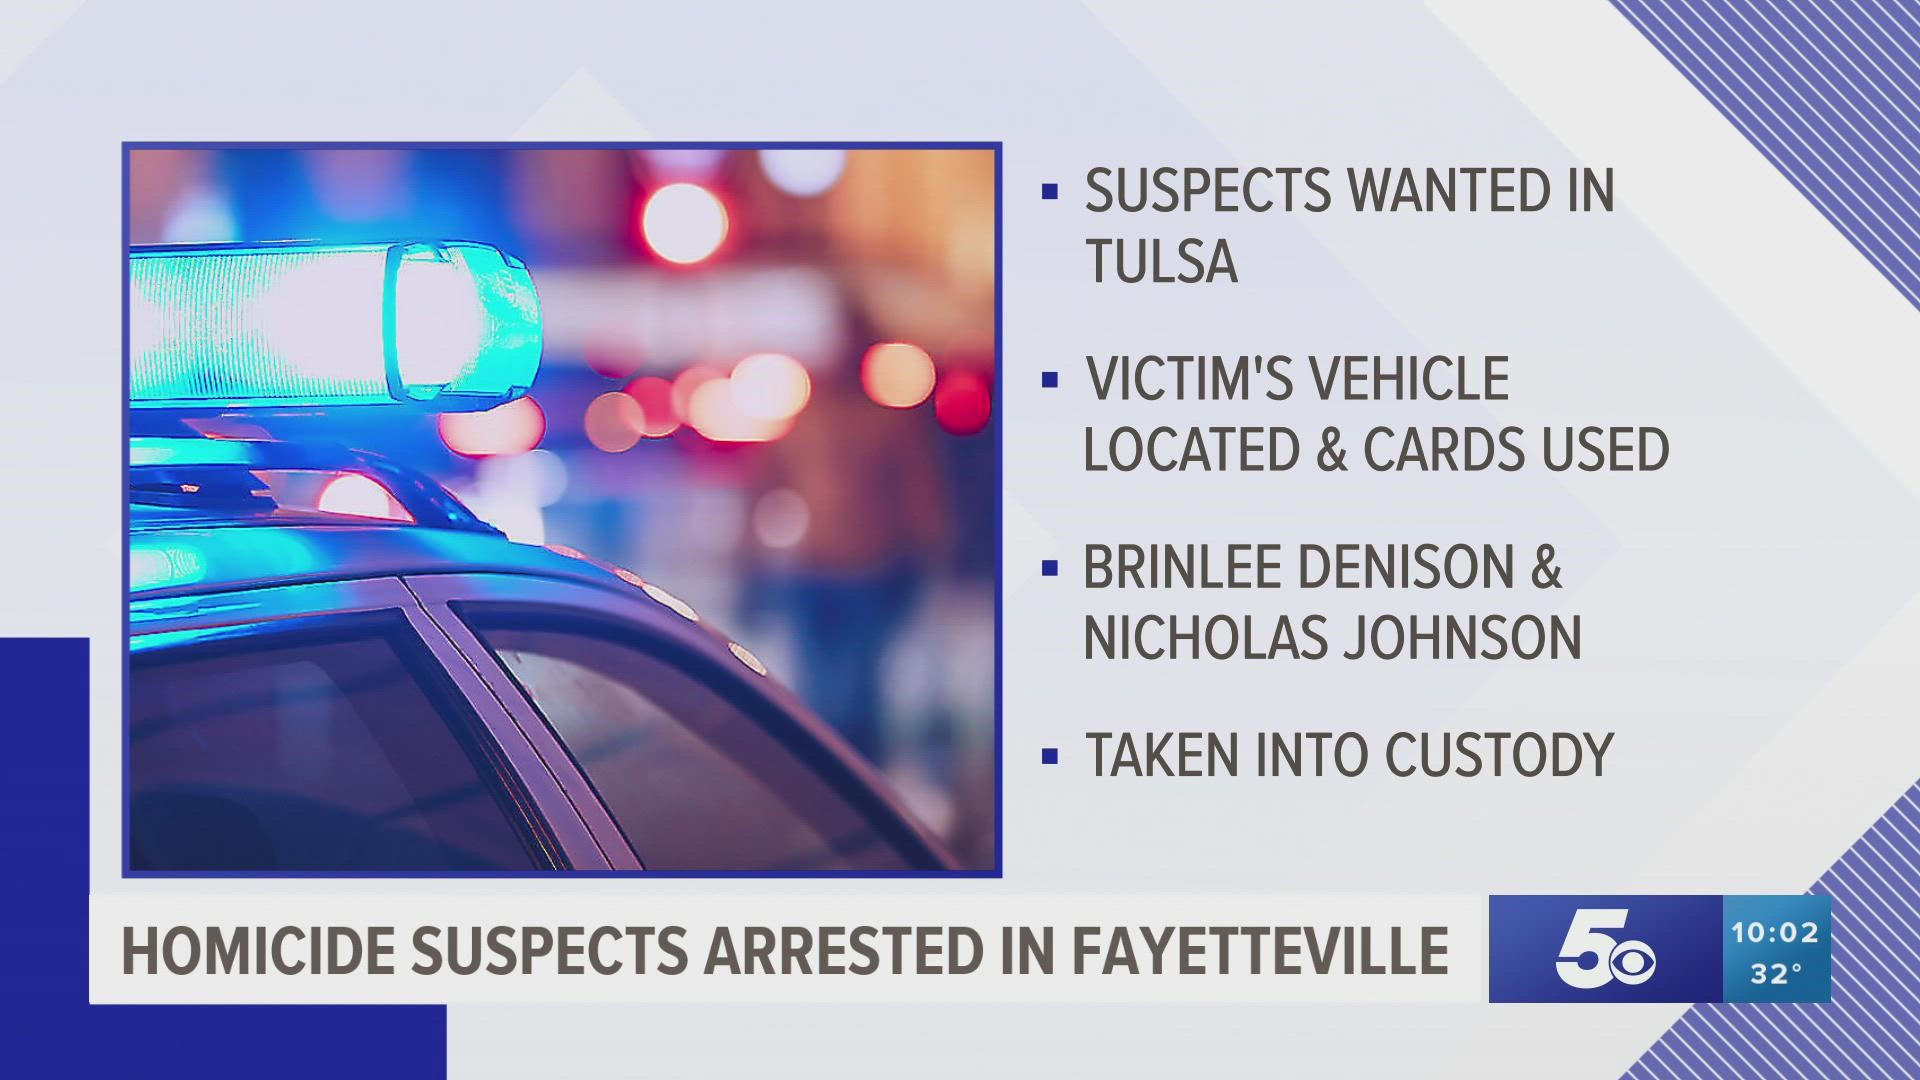 Brinlee Denison, 25, and Nicholas Johnson, 28, were arrested in connection to a homicide that happened in Tulsa, Oklahoma.